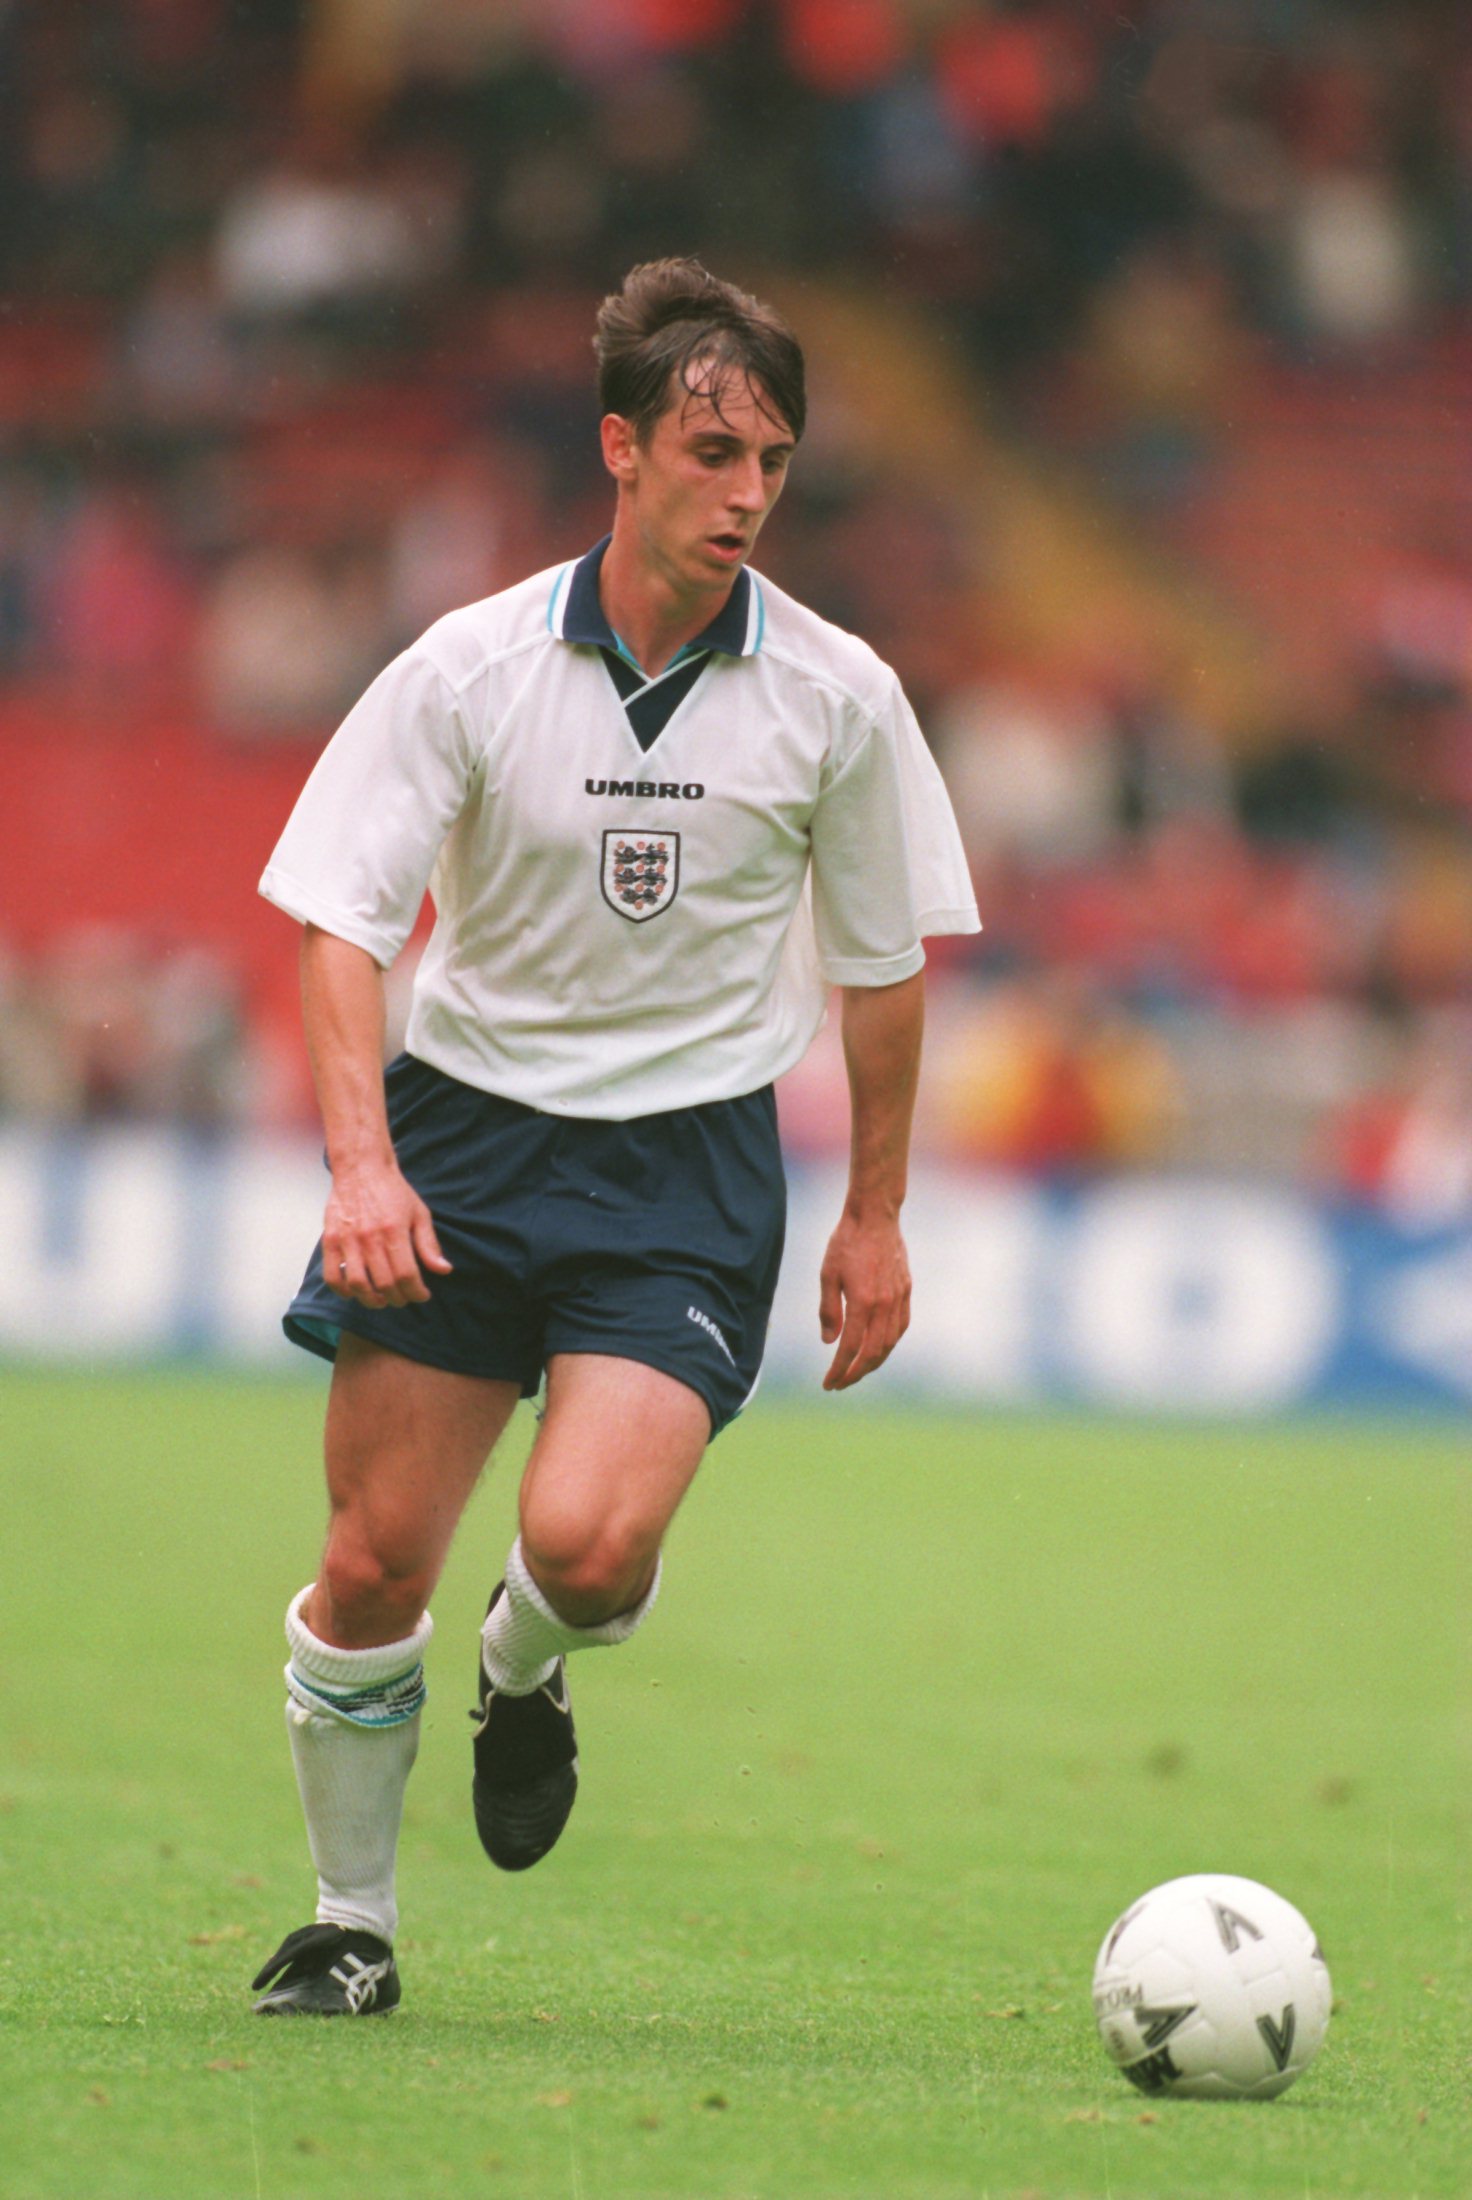 6 JUN 1995:  GARY NEVILLE OF ENGLAND IN ACTION DURING AN UMBRO CUP MATCH AGAINST JAPAN AT WEMBLEY STADIUM. THE GAME ENDED IN A 1-1 DRAW. Mandatory Credit: Chris Cole/ALLSPORT